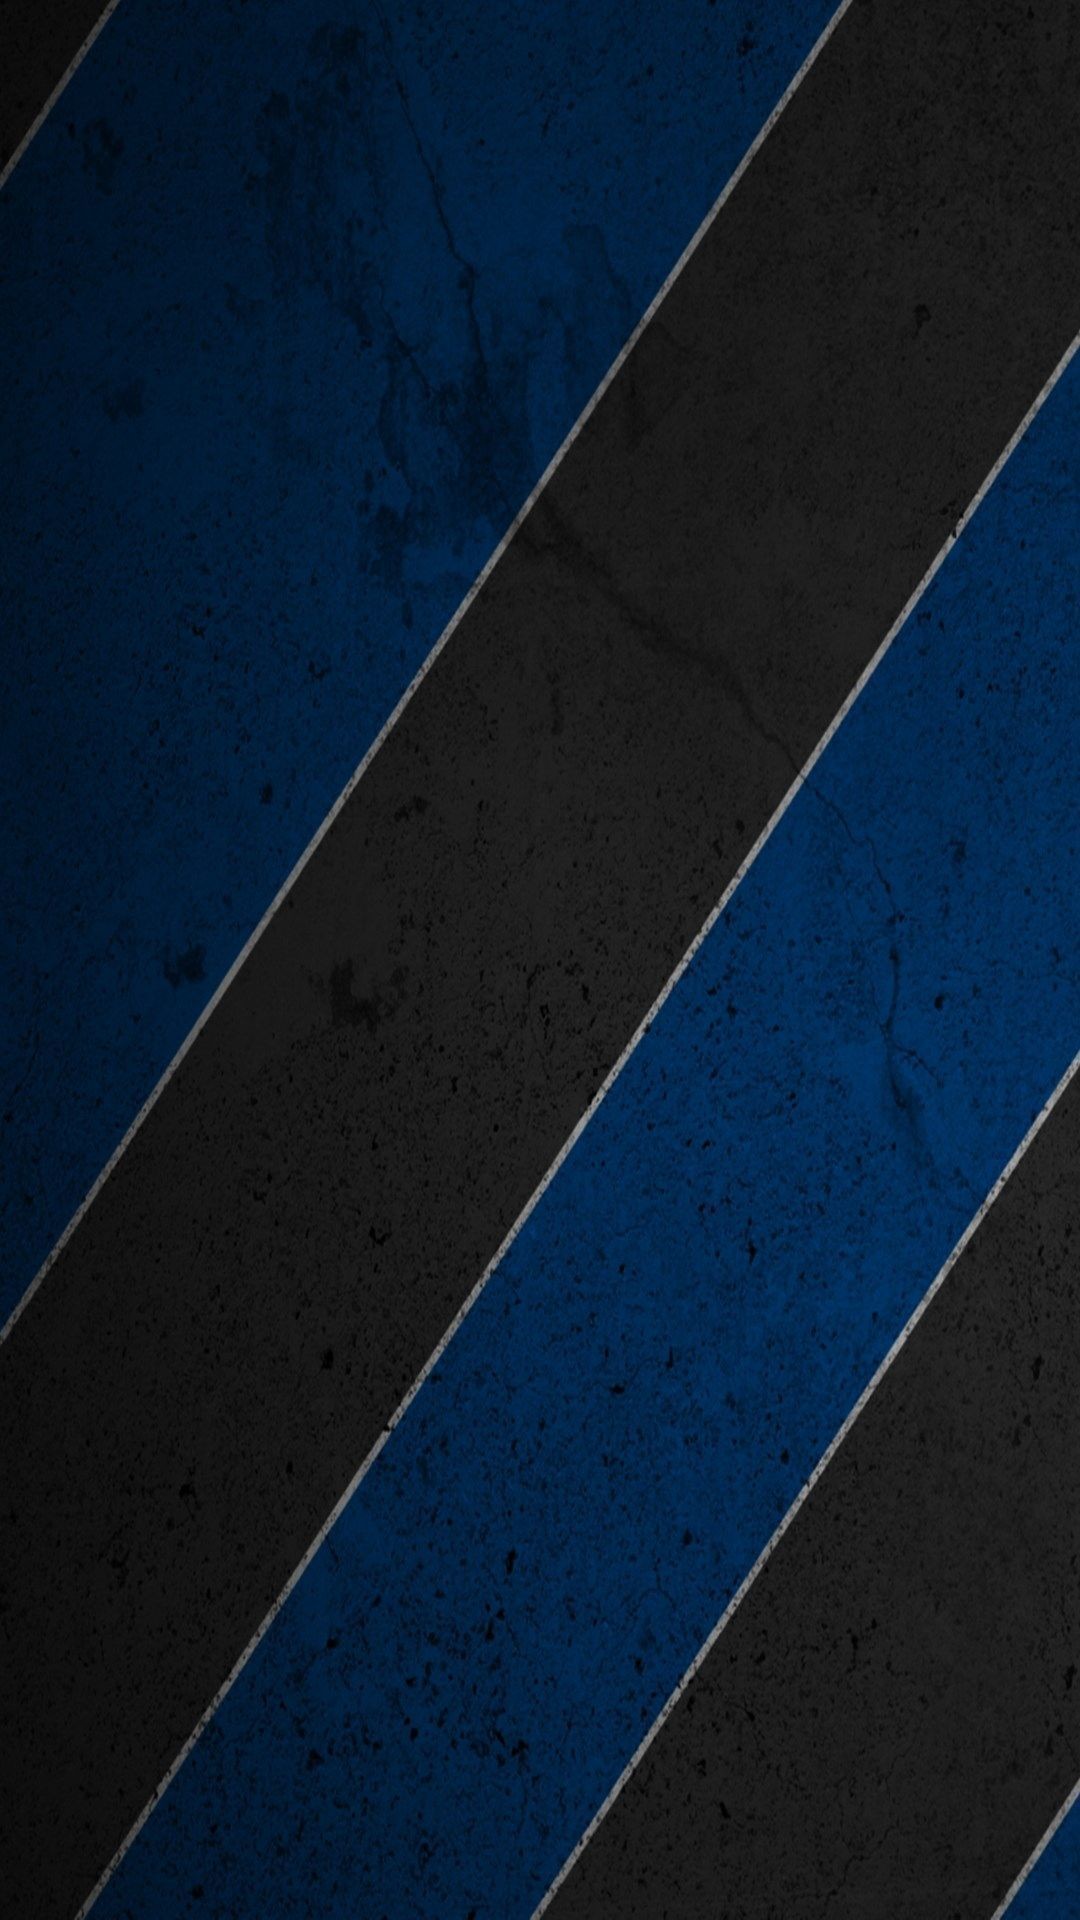 1080x1920 Android Abstract wallpaper full-hd- black and blue .